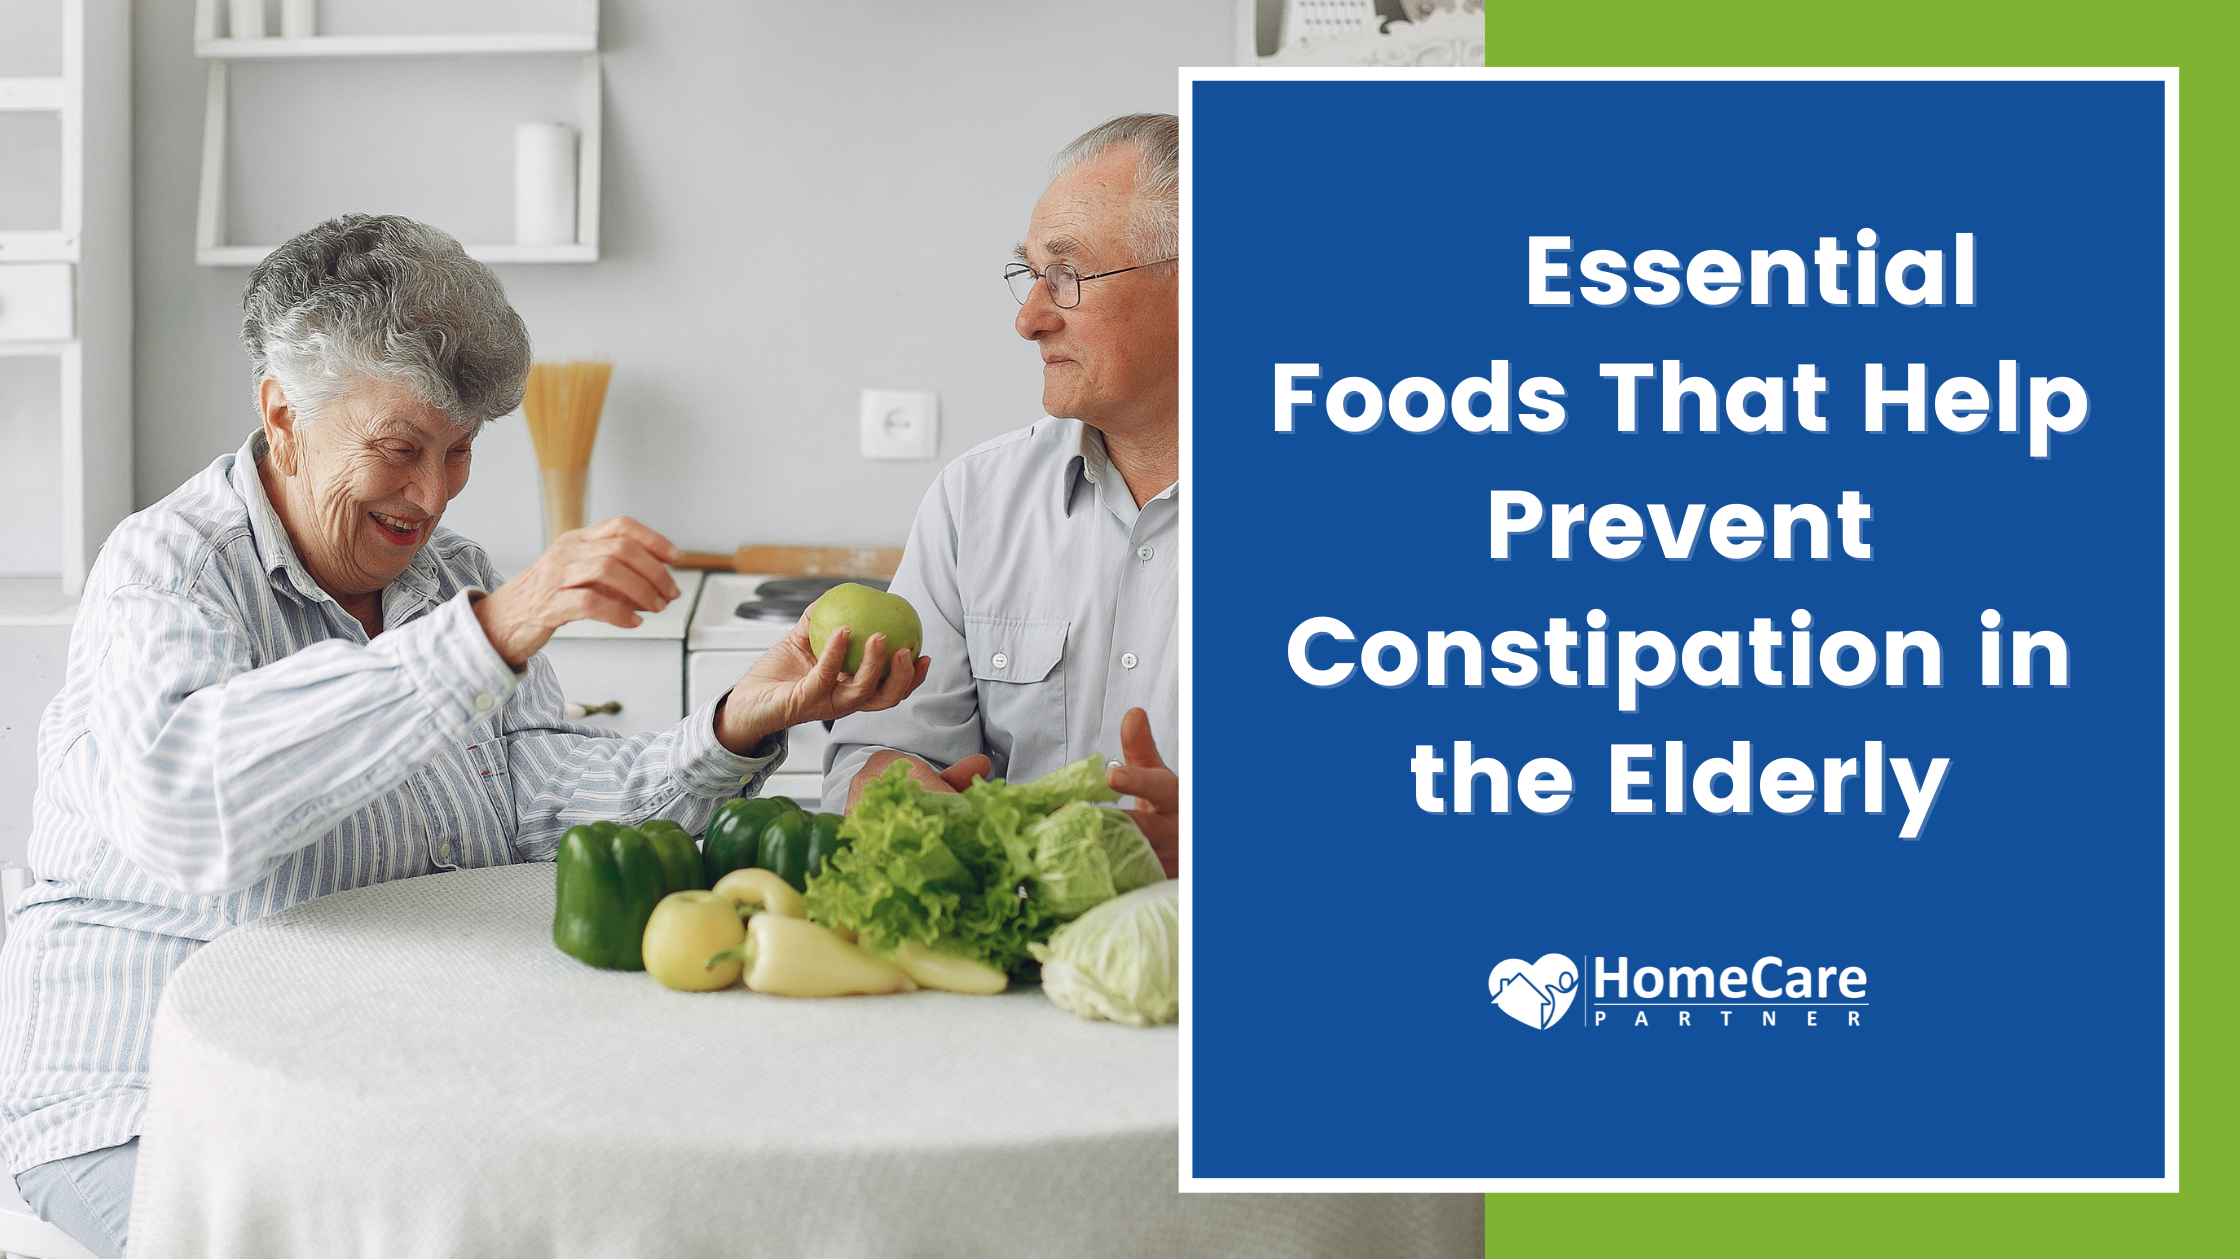 Essential Foods That Help Prevent Constipation in the Elderly